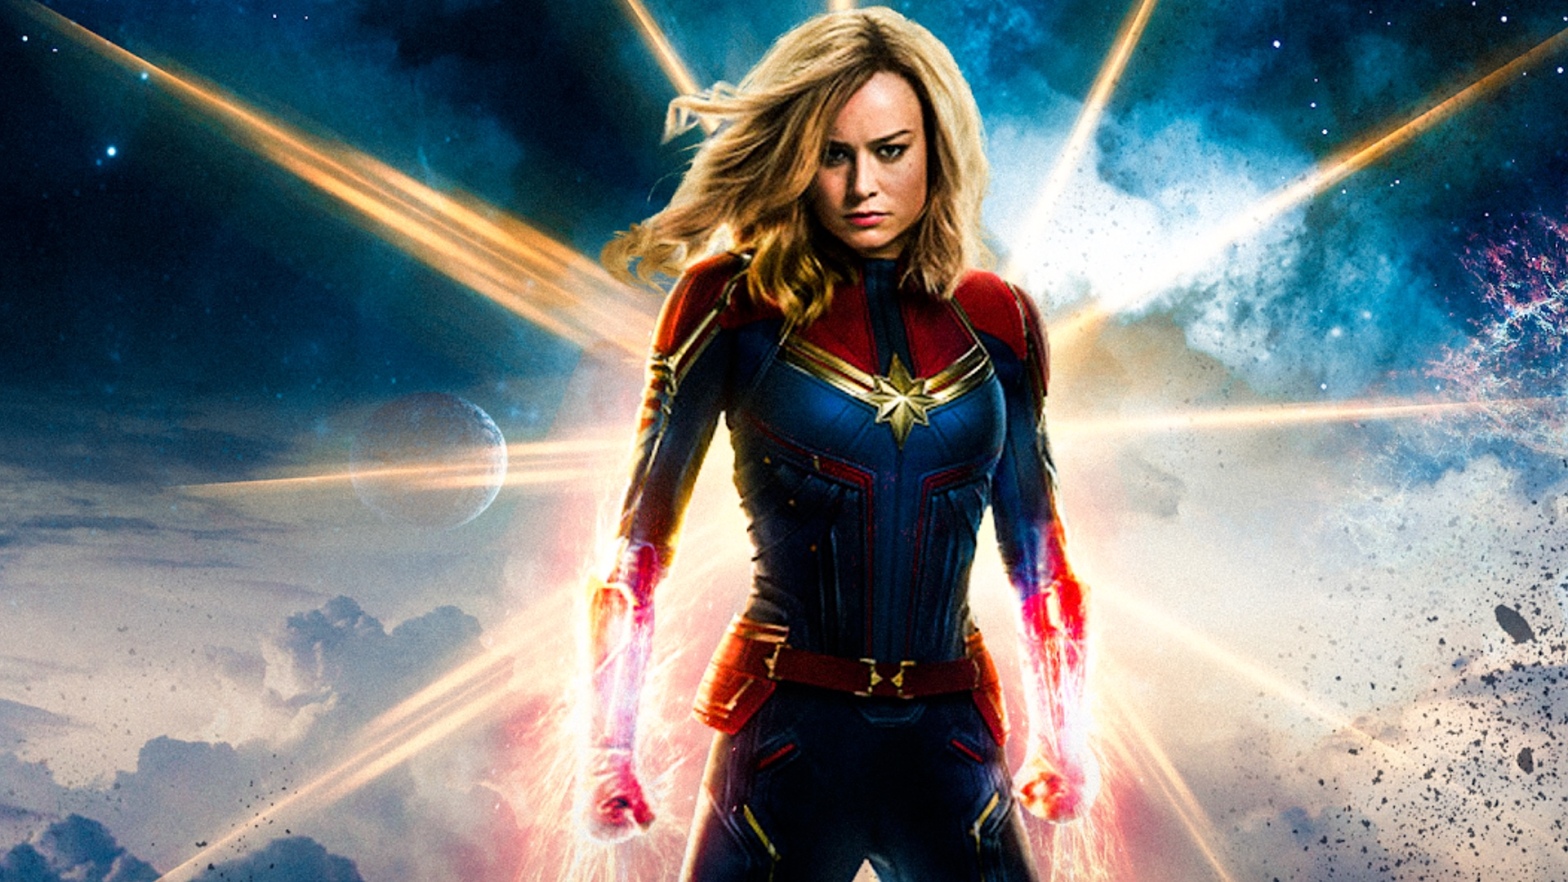 Captain Marvel was one of the only Marvel films I’ve gone into with almost no knowledge on the main character. But it’s a movie I’ve been looking forward to, and it certainly followed up on my expectations—even if I wasn’t really sure what those are myself.